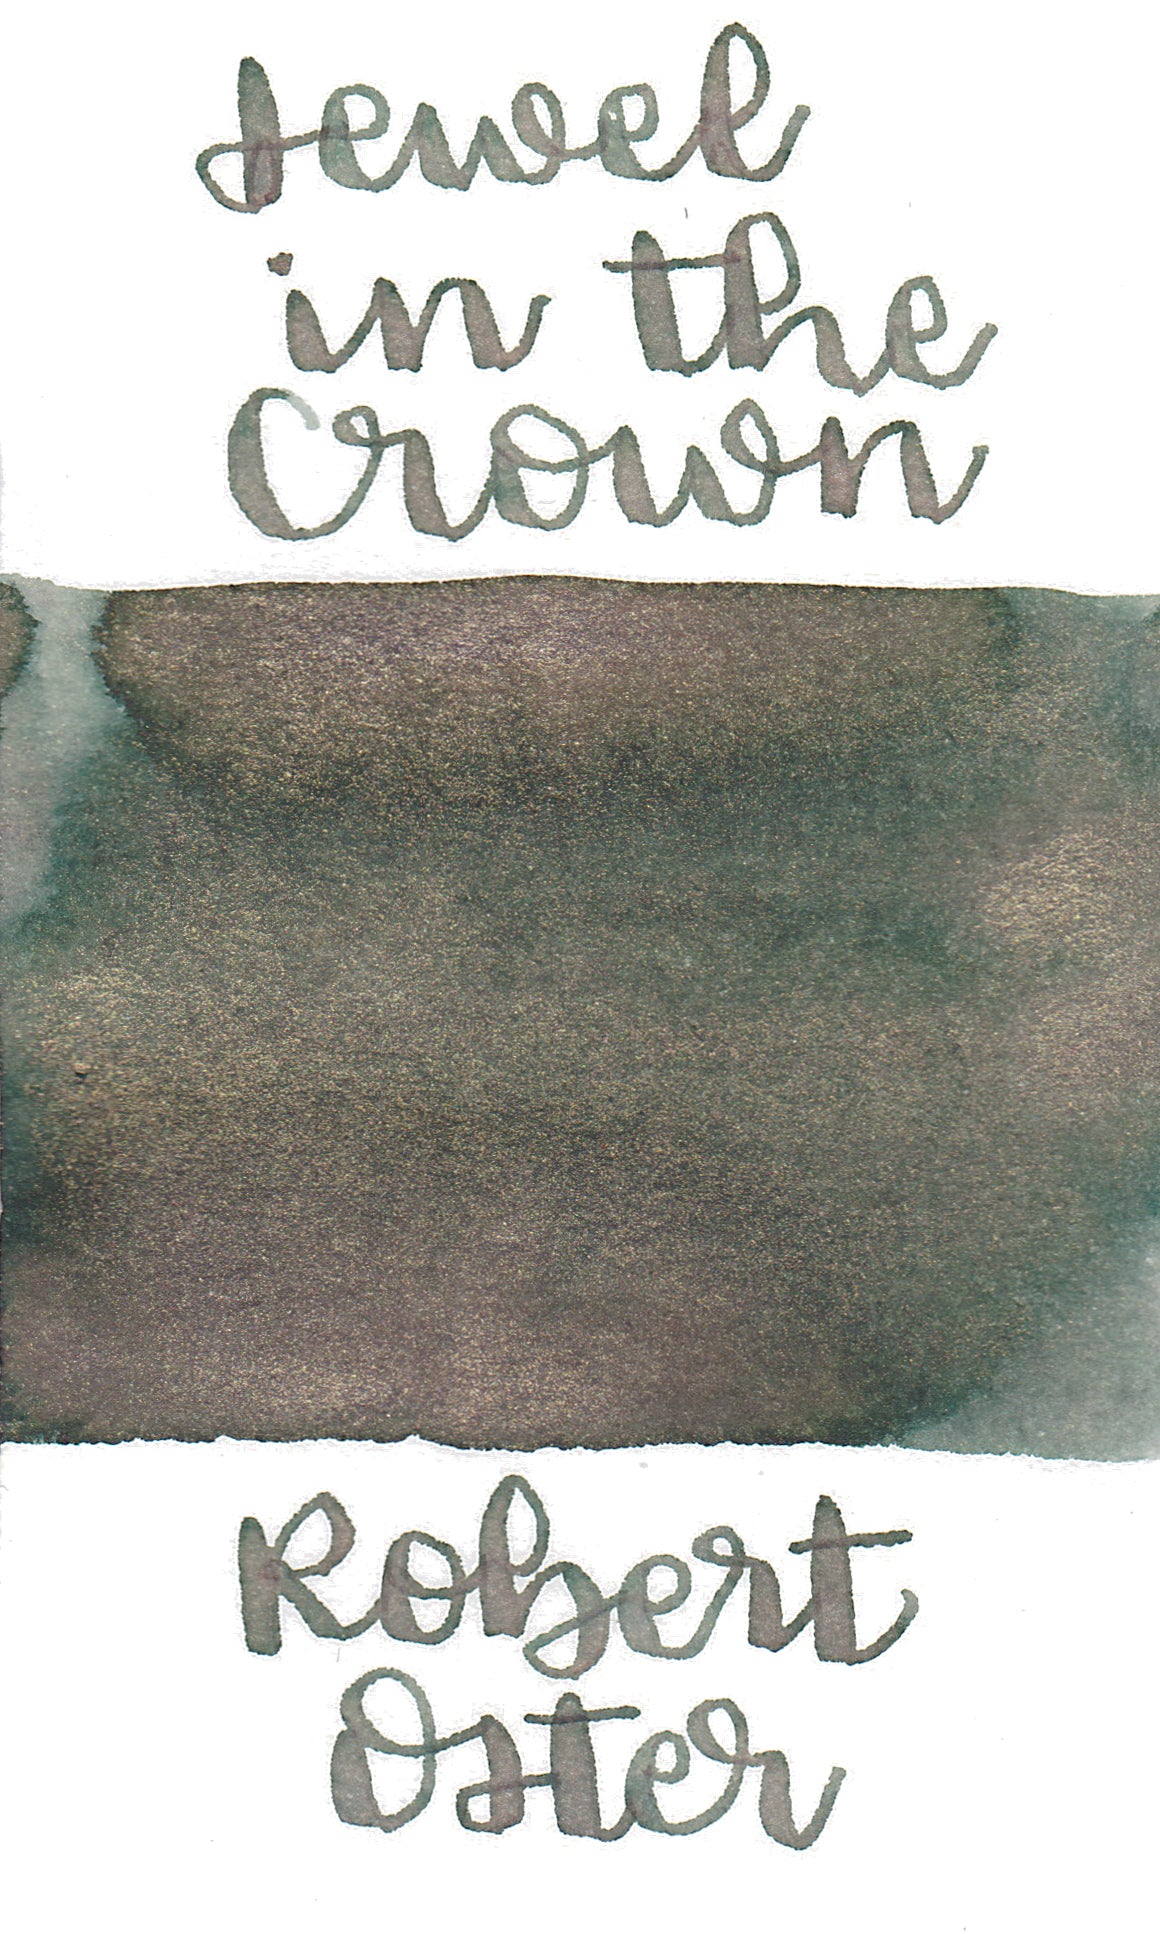 Robert Oster 7th Anniversary Jewel in the Crown